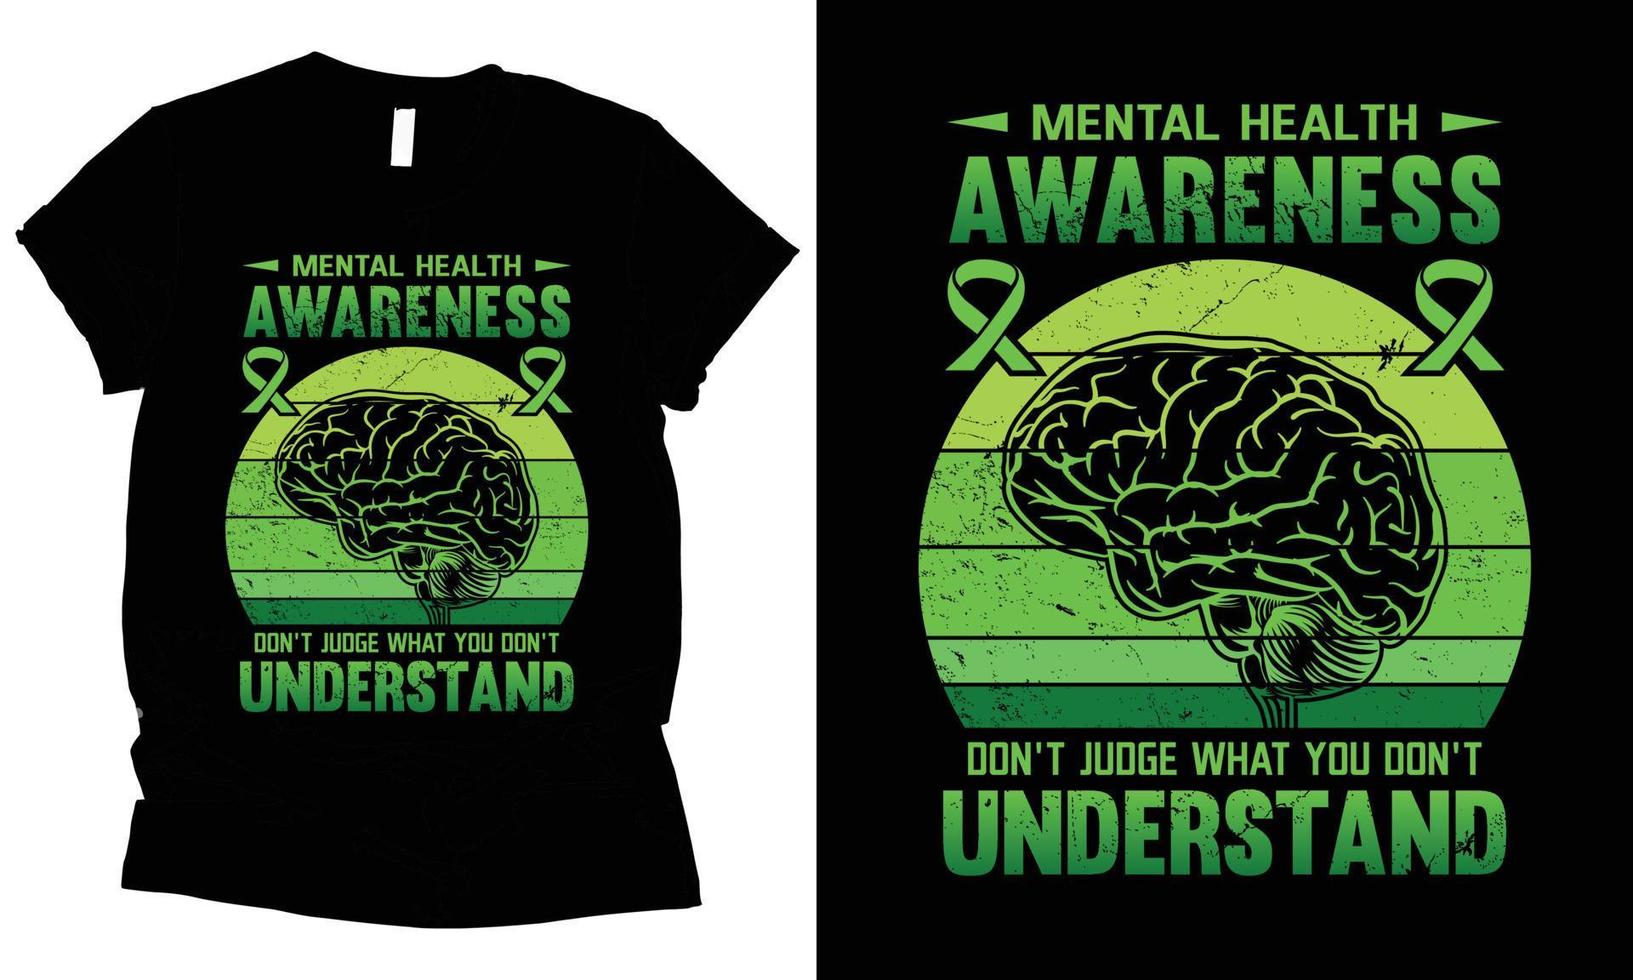 Mental health awareness don't judge what you don't understand world cancer day t-shirt design vector